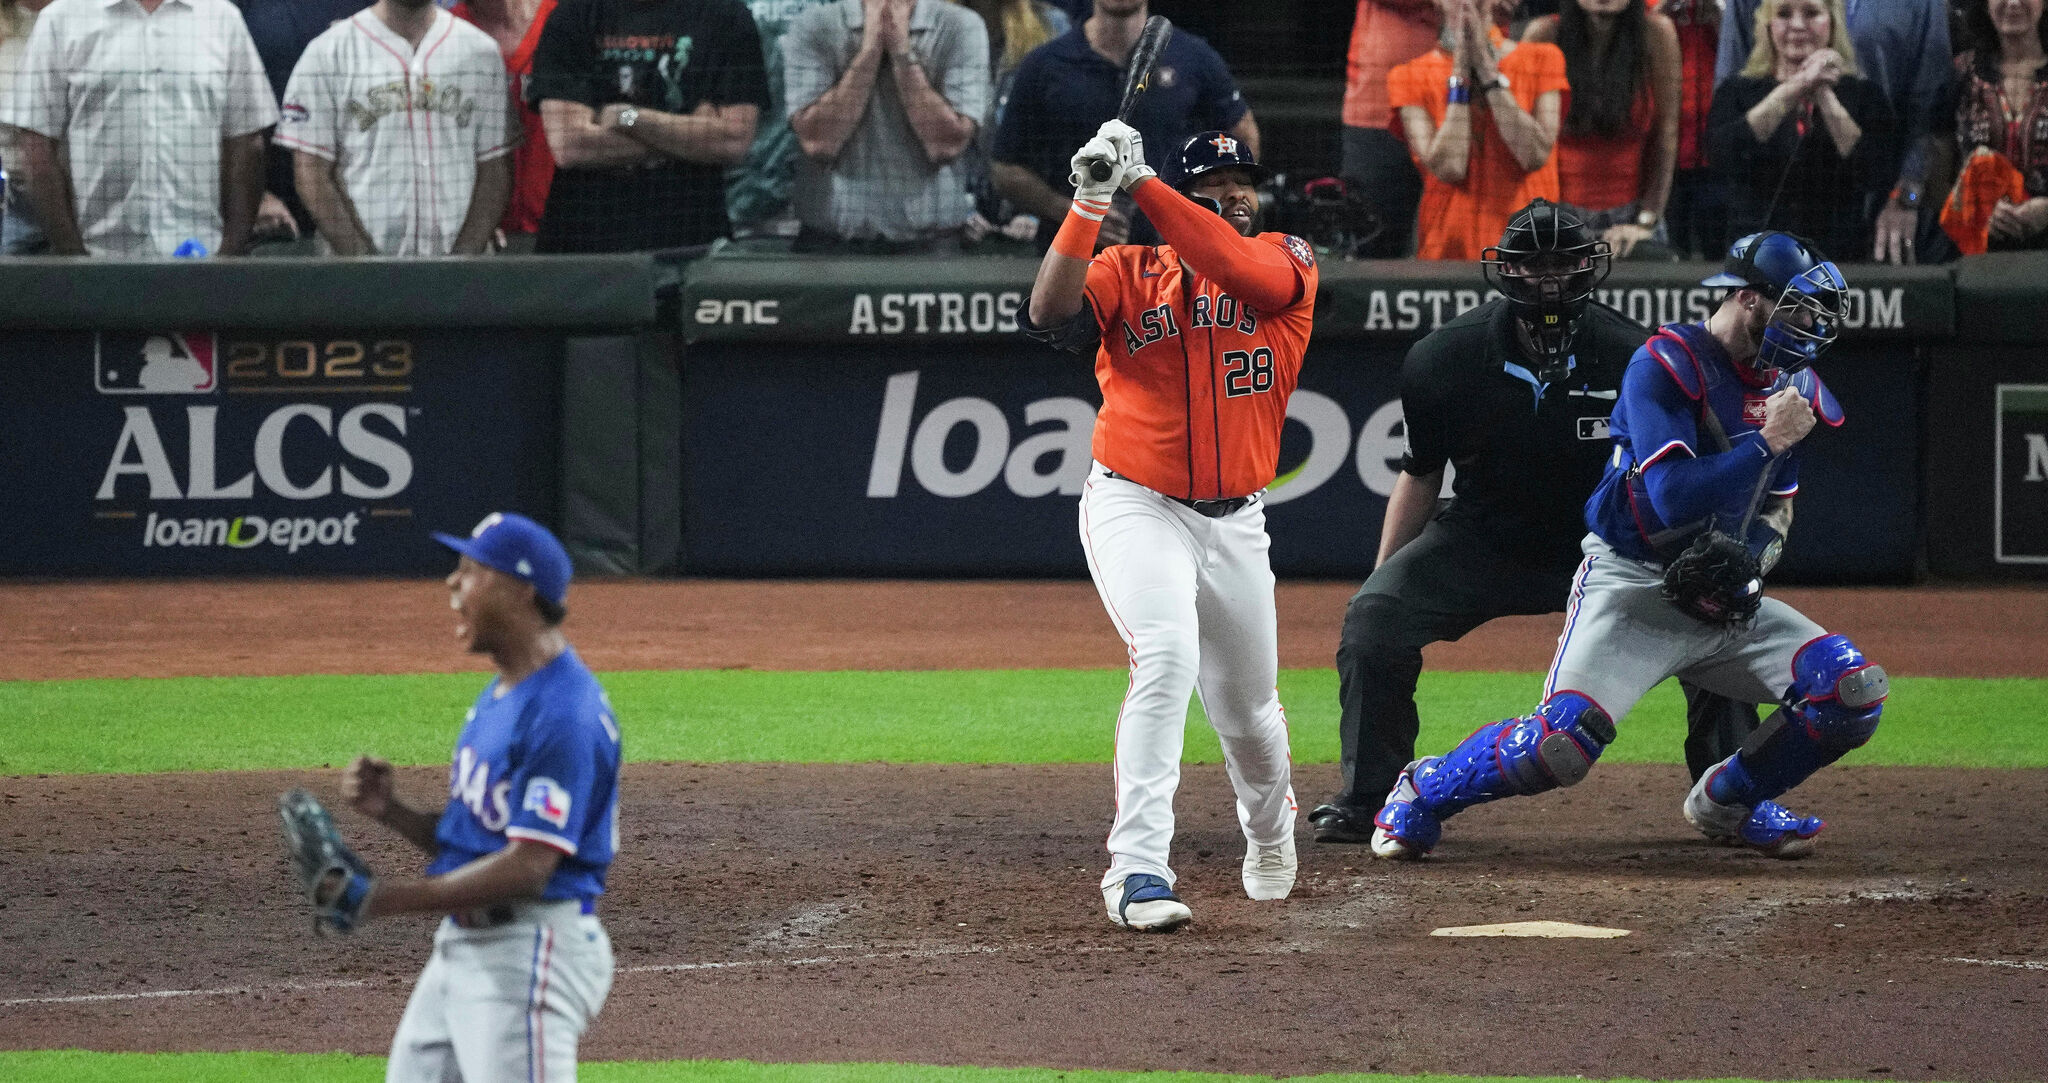 Rangers 8, Astros 3: This is not the 1999 I remember - The